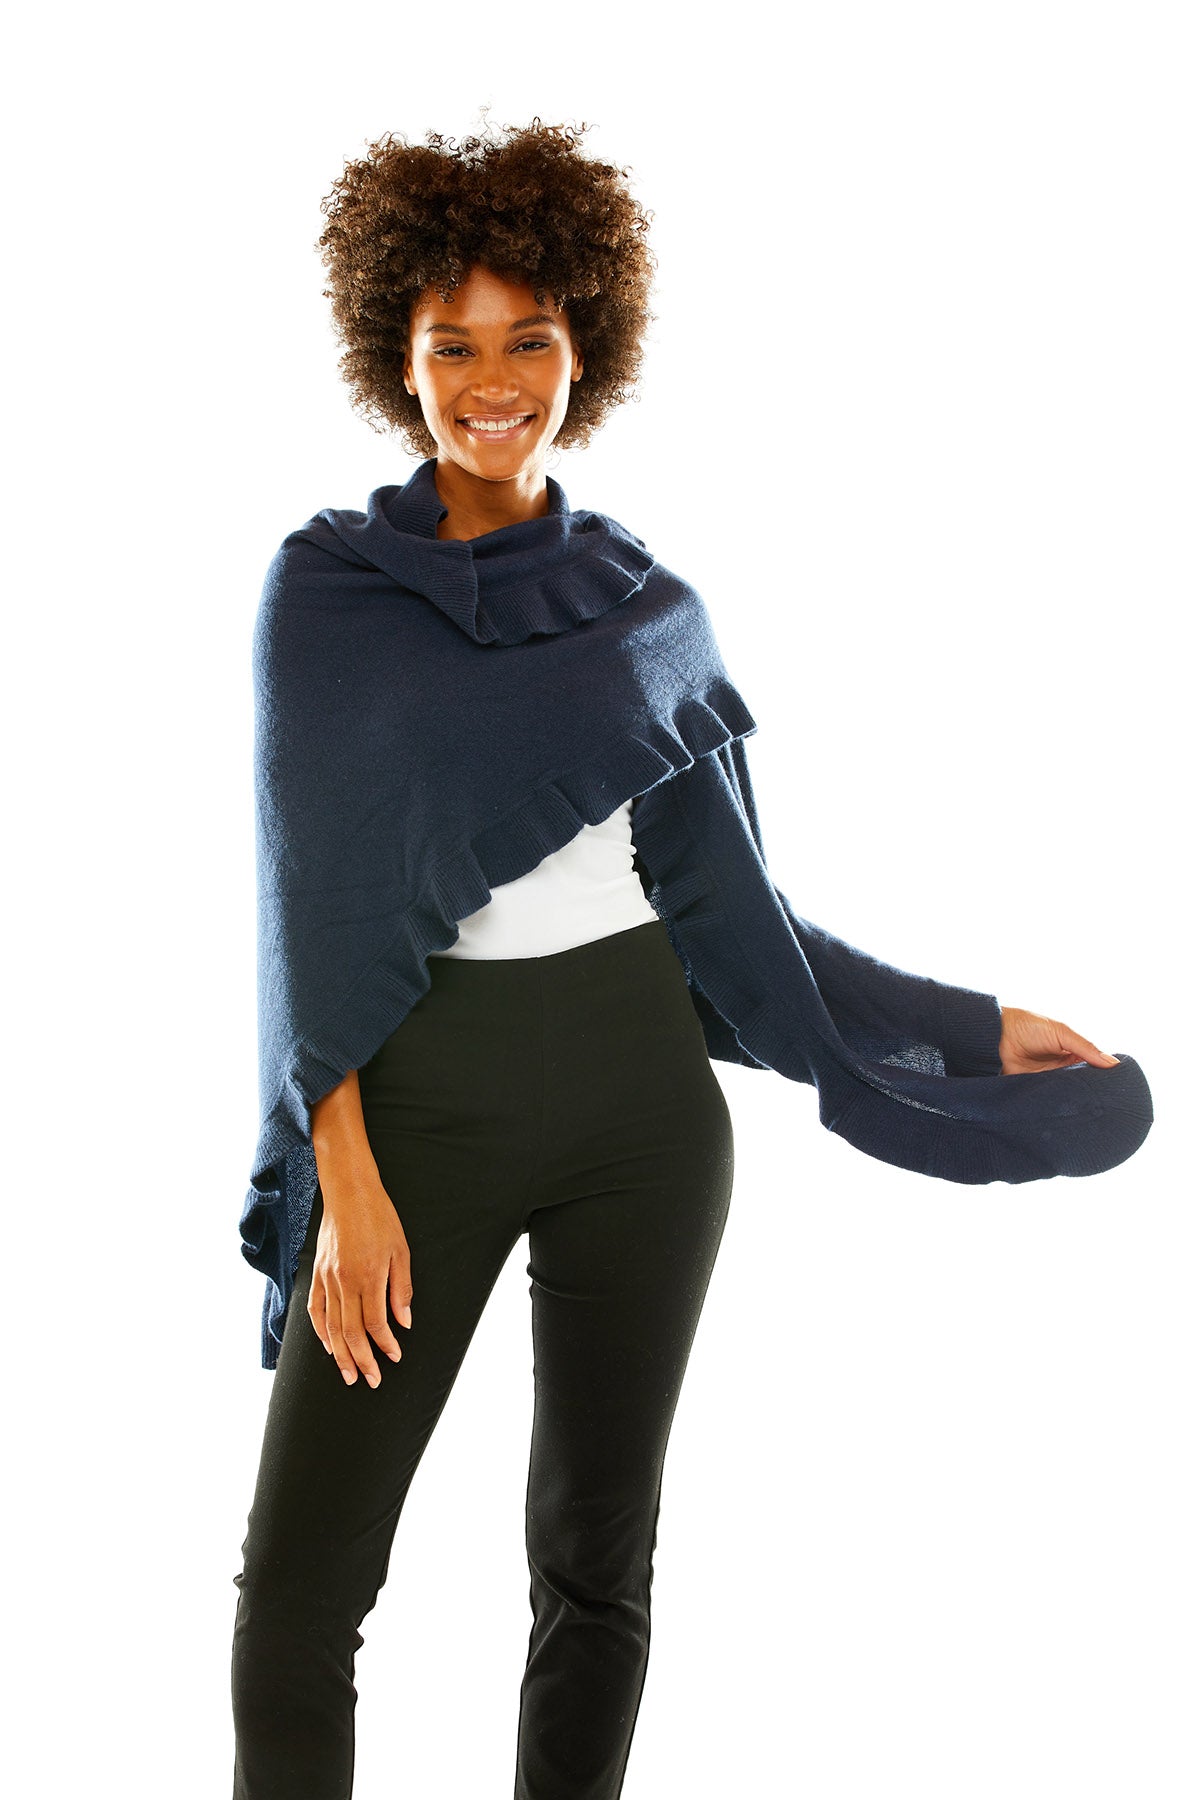 Navy cashmere wrap with ruffle edge. Perfect for everyday wear and as a cocktail attire accessory